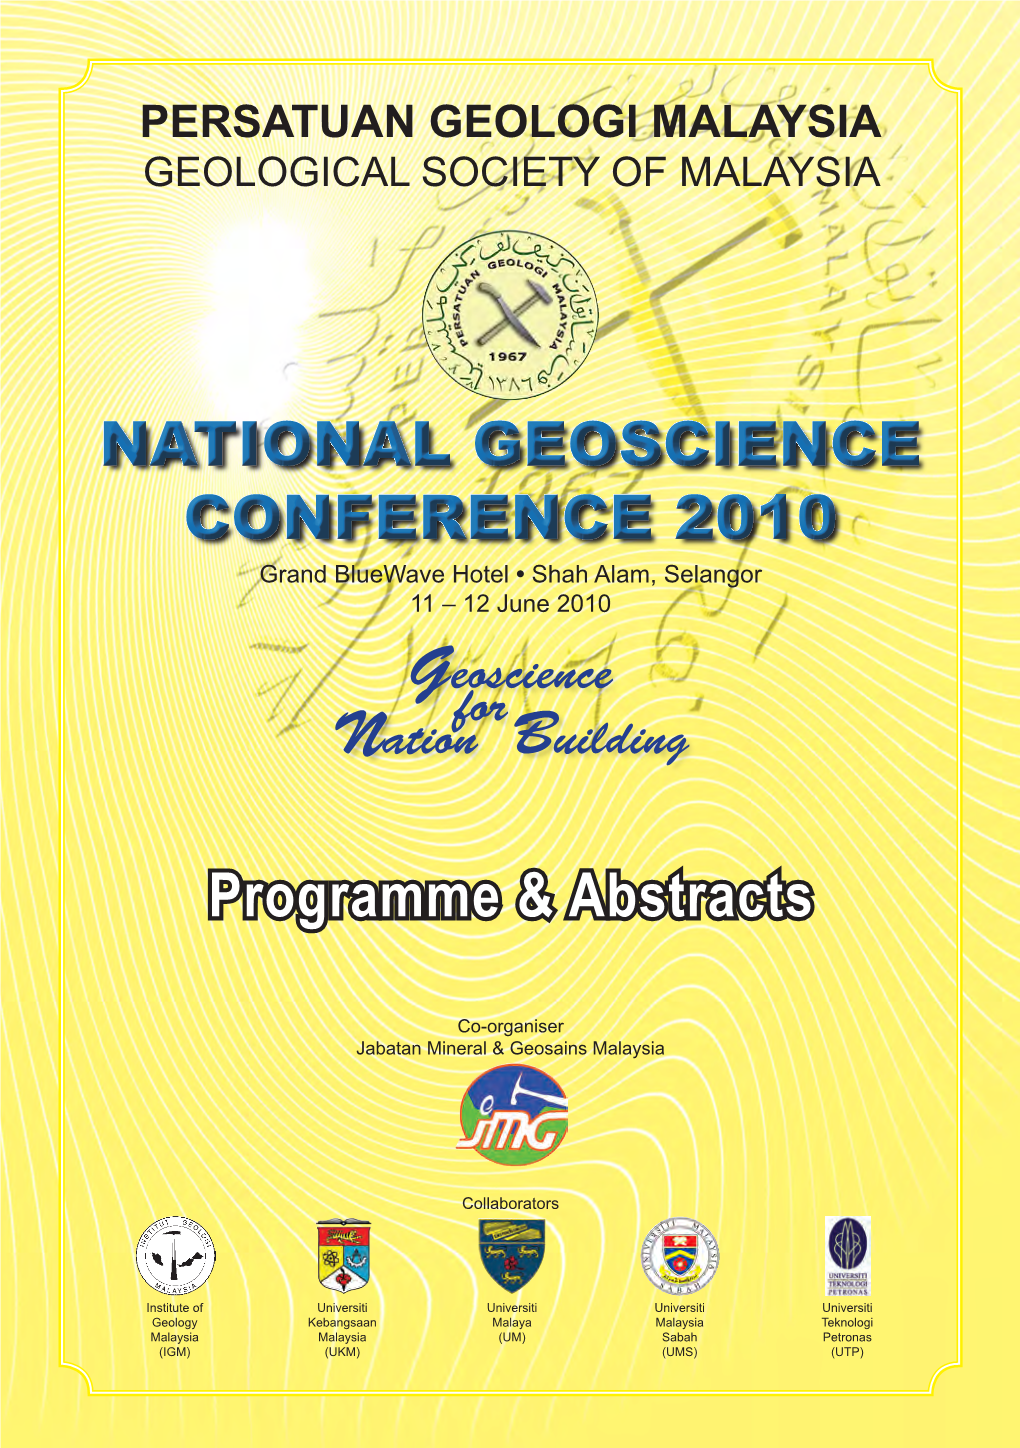 NATIONAL GEOSCIENCE CONFERENCE 2010 Grand Bluewave Hotel • Shah Alam, Selangor 11 – 12 June 2010 Geoscience for Nation Building